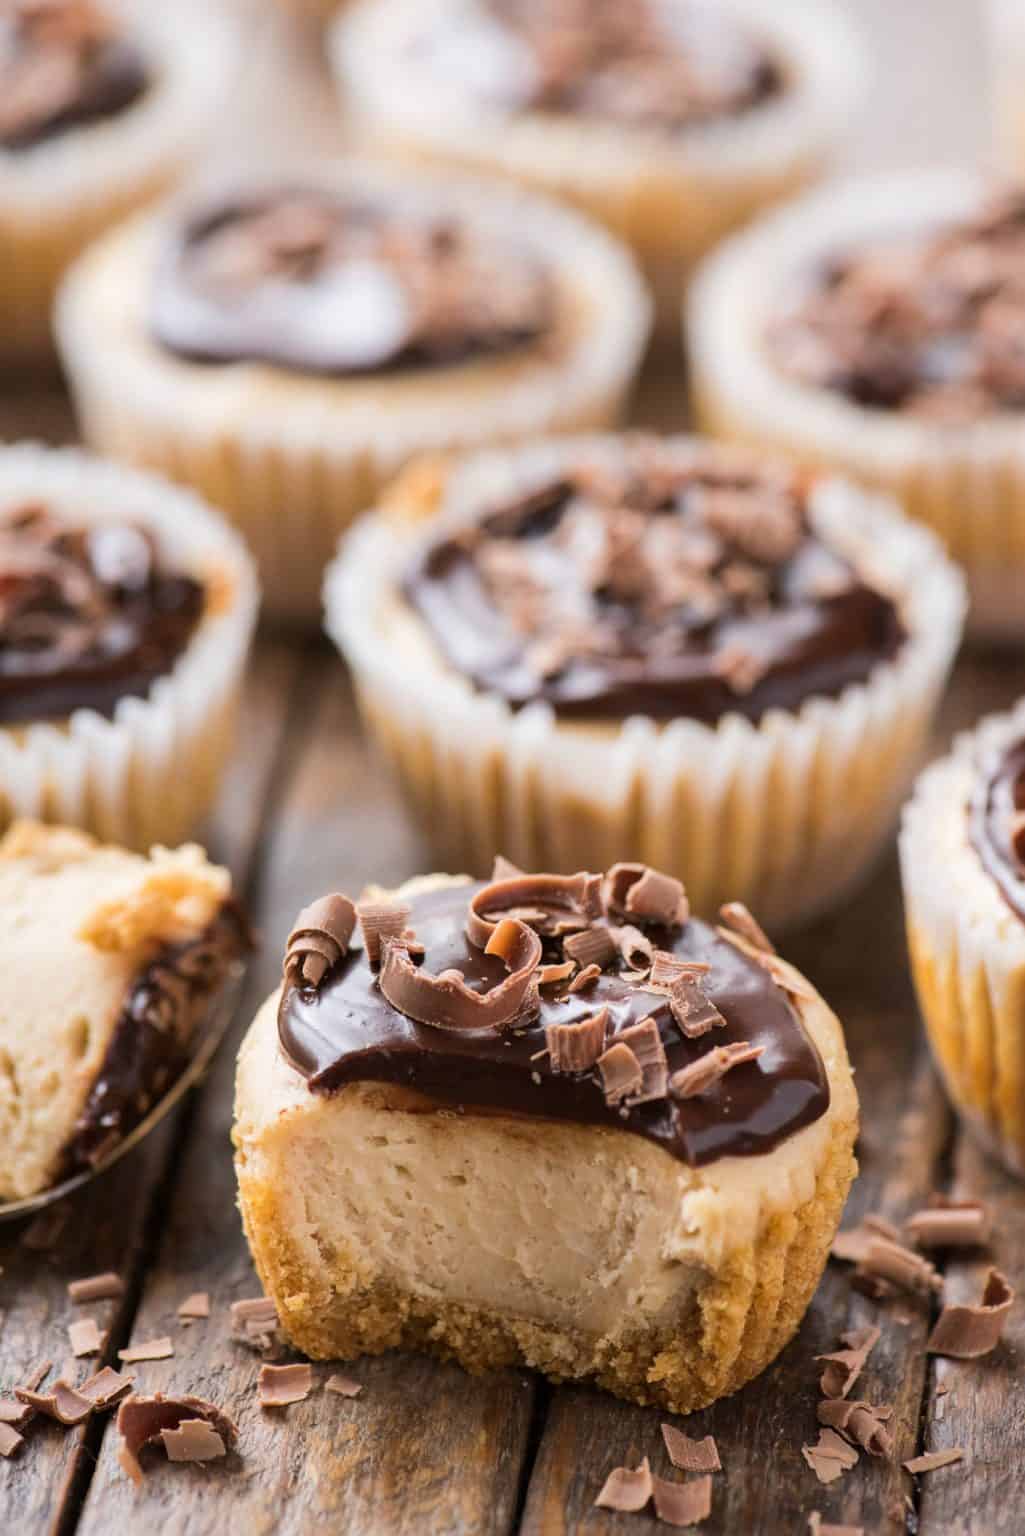 Mini Peanut Butter Cheesecakes - 7 ingredients, make in muffin pan!